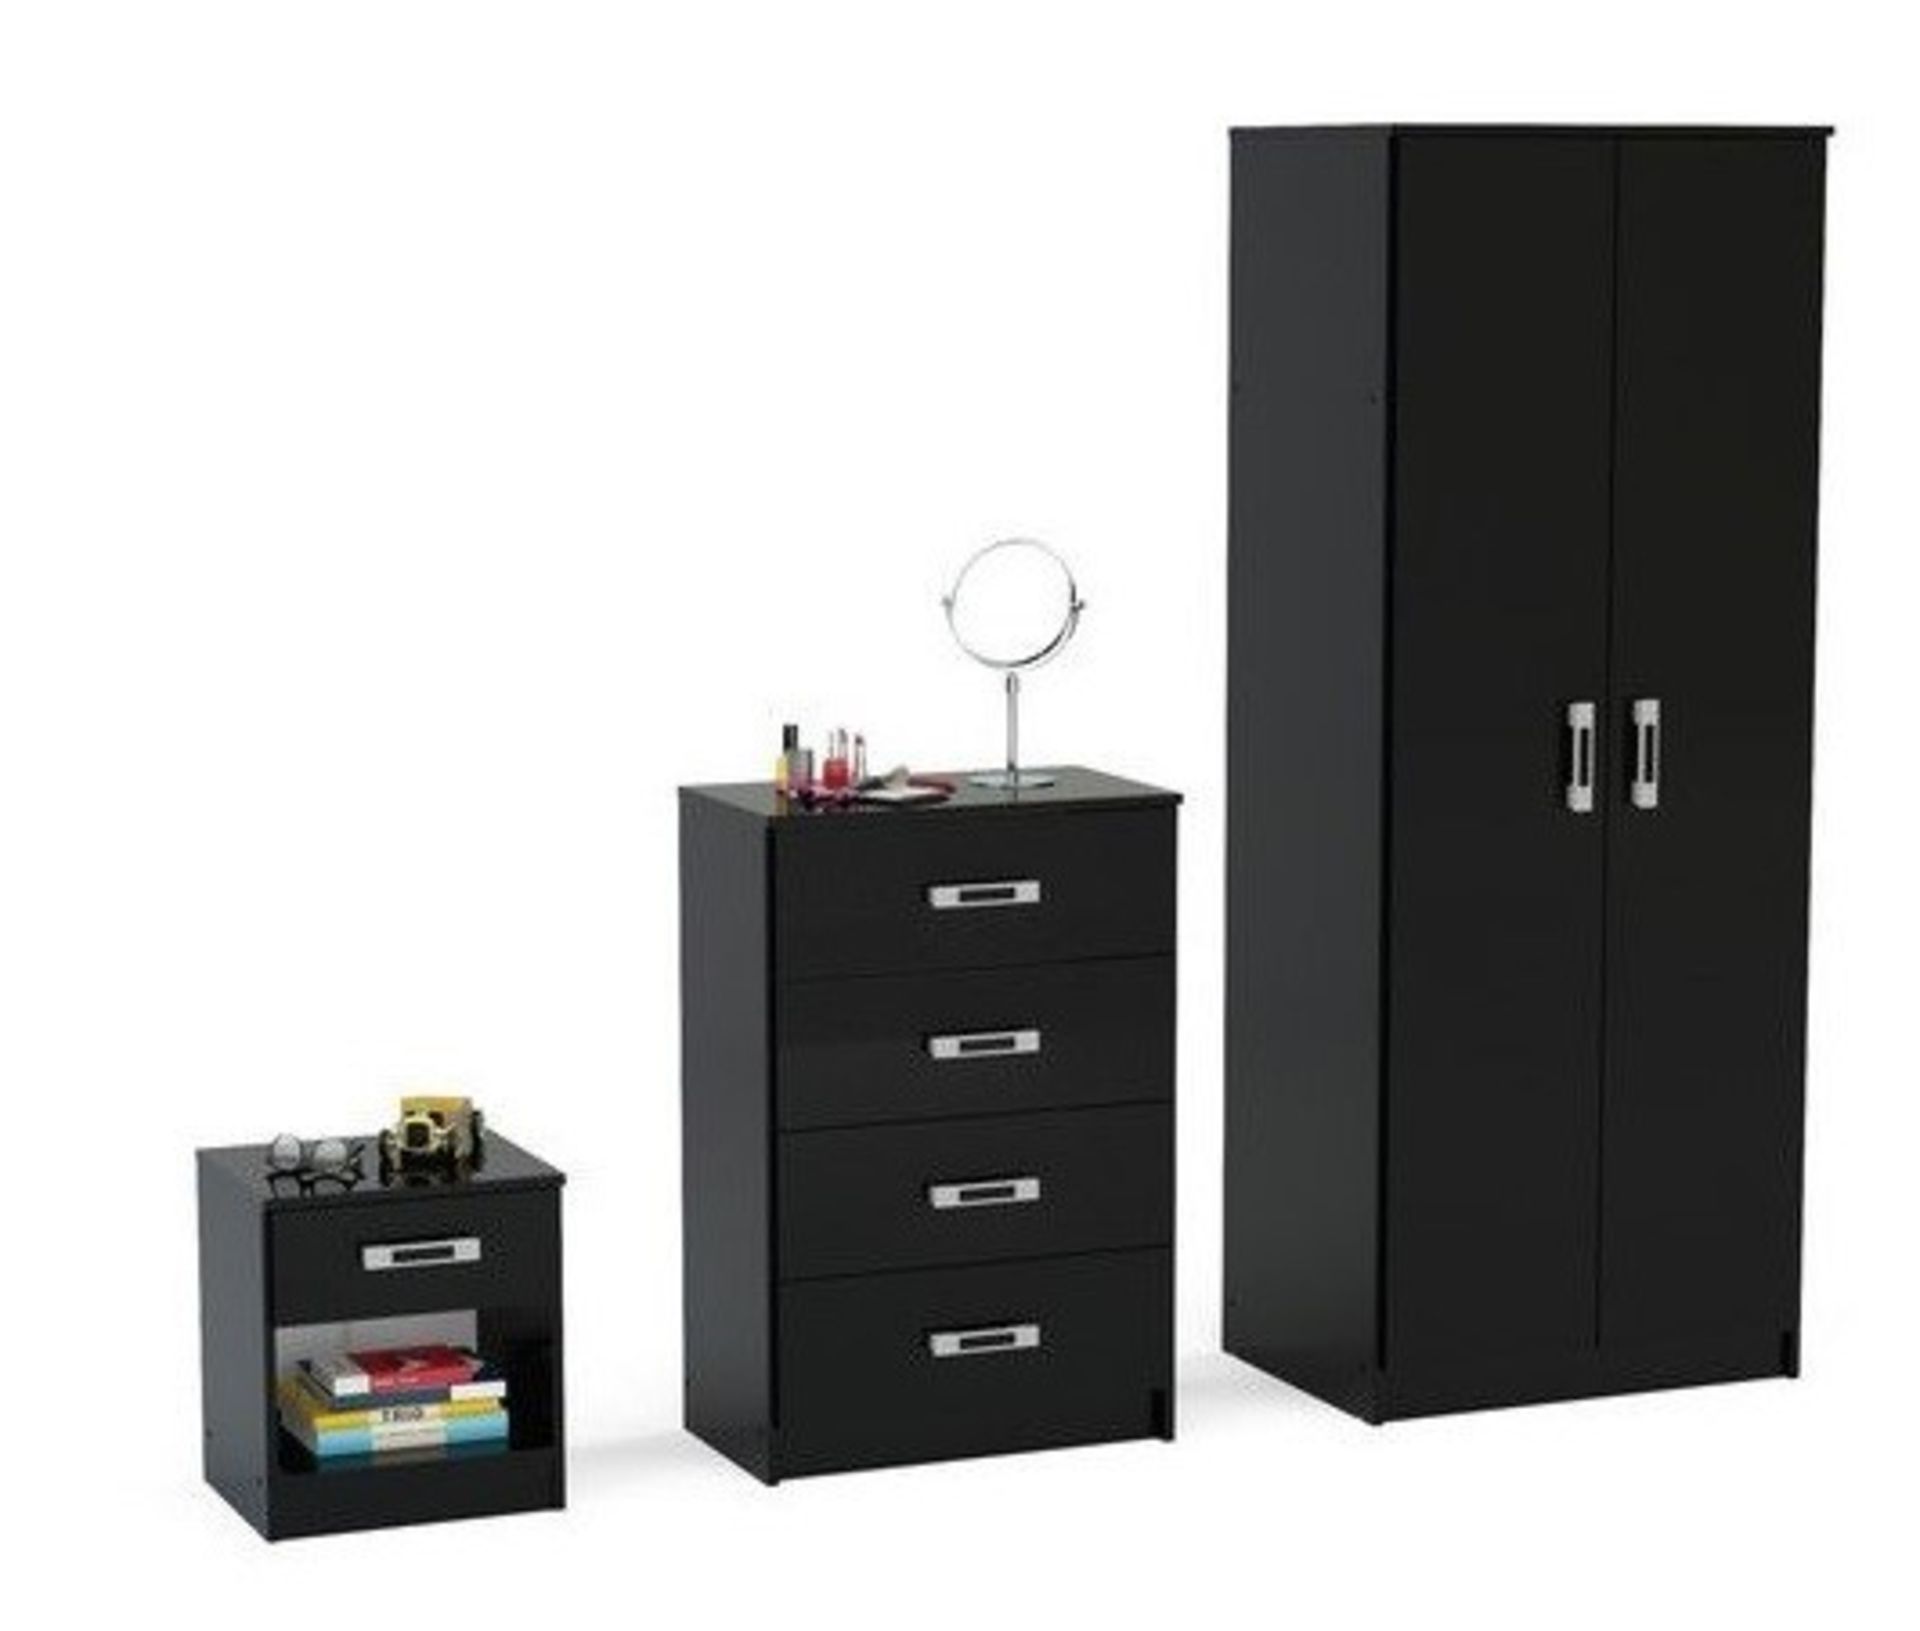 1 x "TRIO" High Gloss 3-Piece Bedroom Furniture Set In BLACK - Brand New & Boxed - Includes - Image 2 of 3